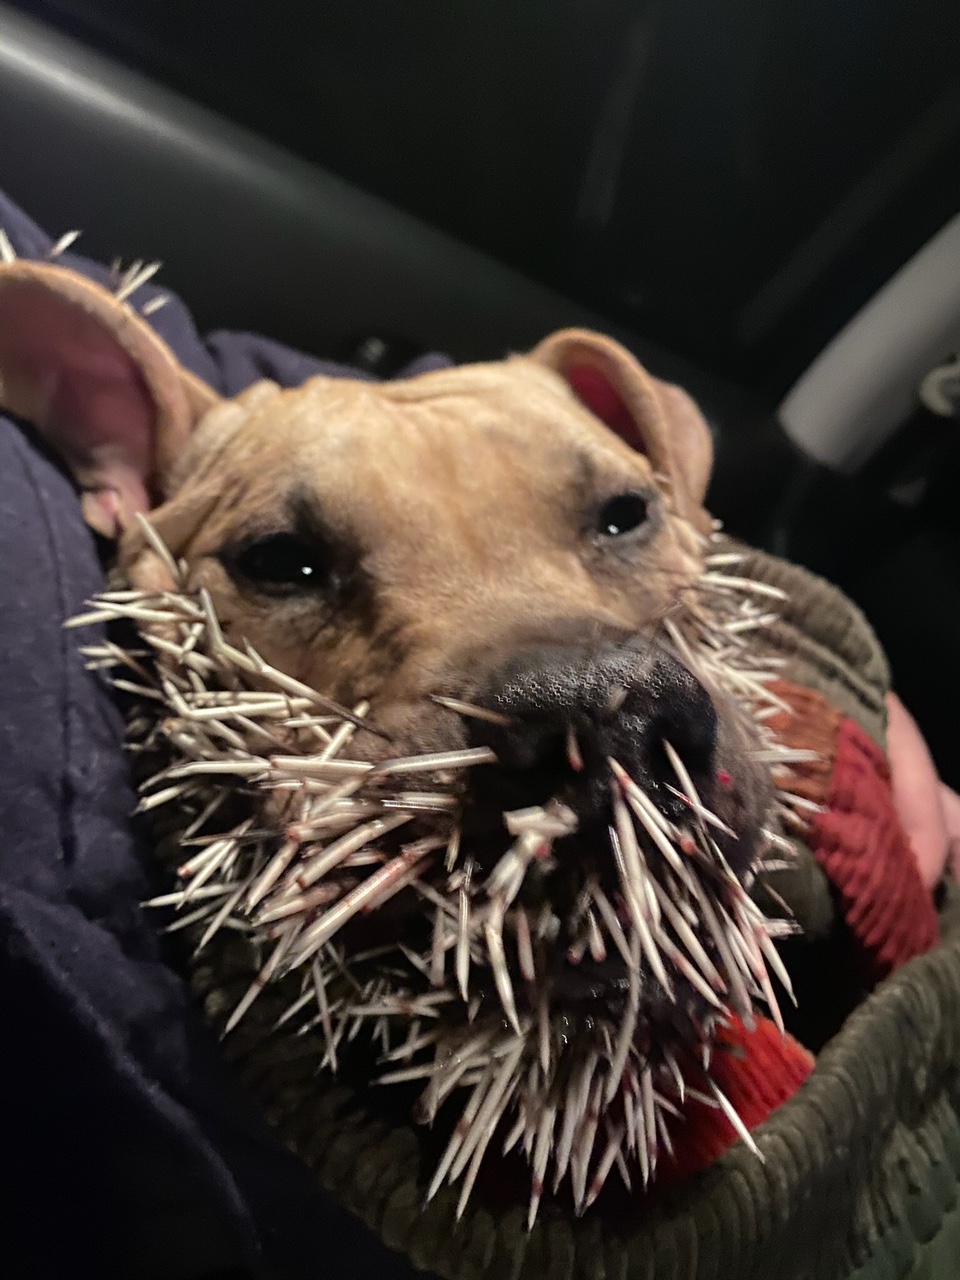 dog with quills in face from porcupine